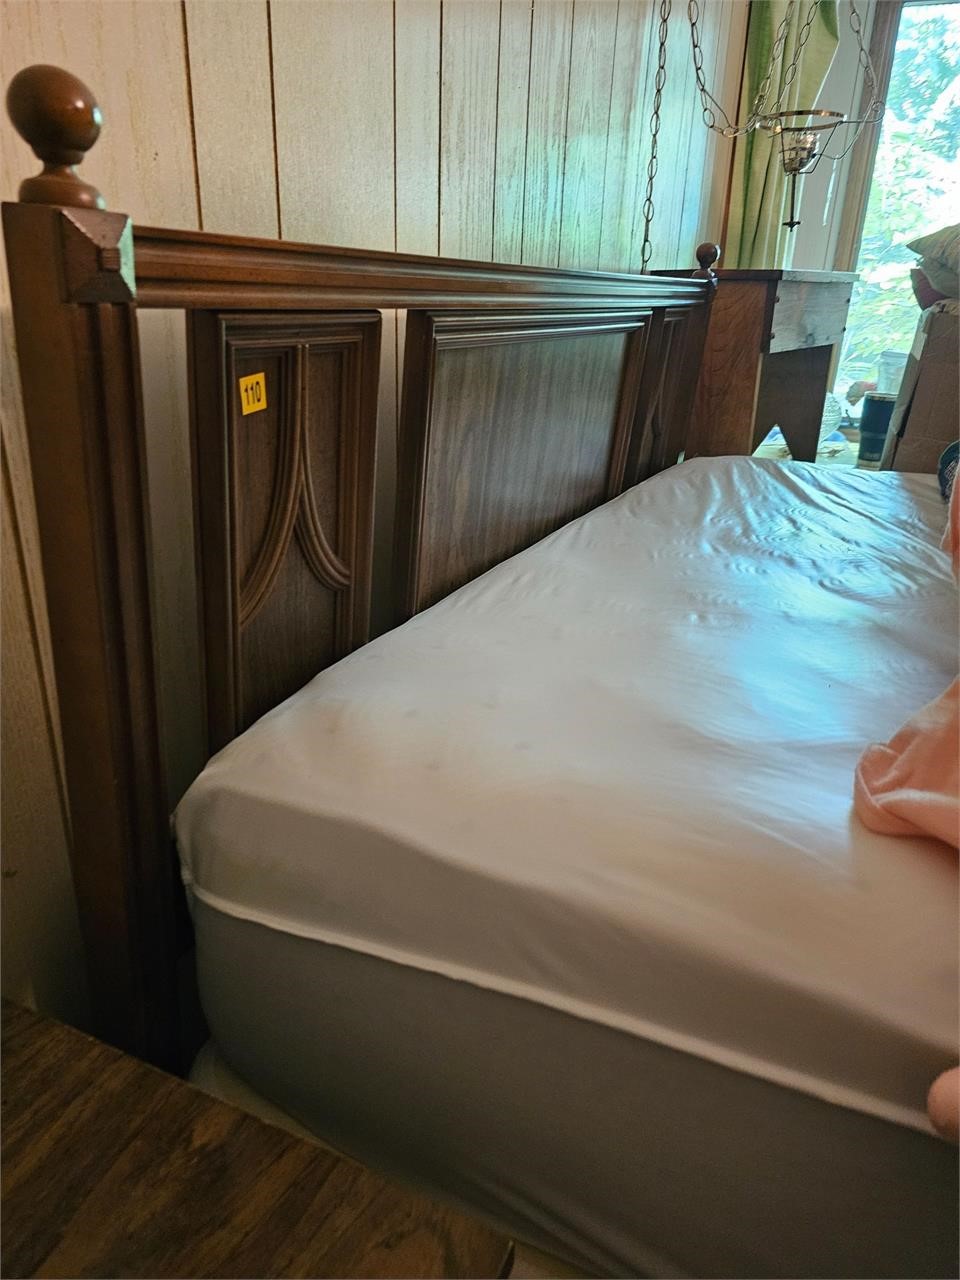 King size bed with head board/ no content incl.